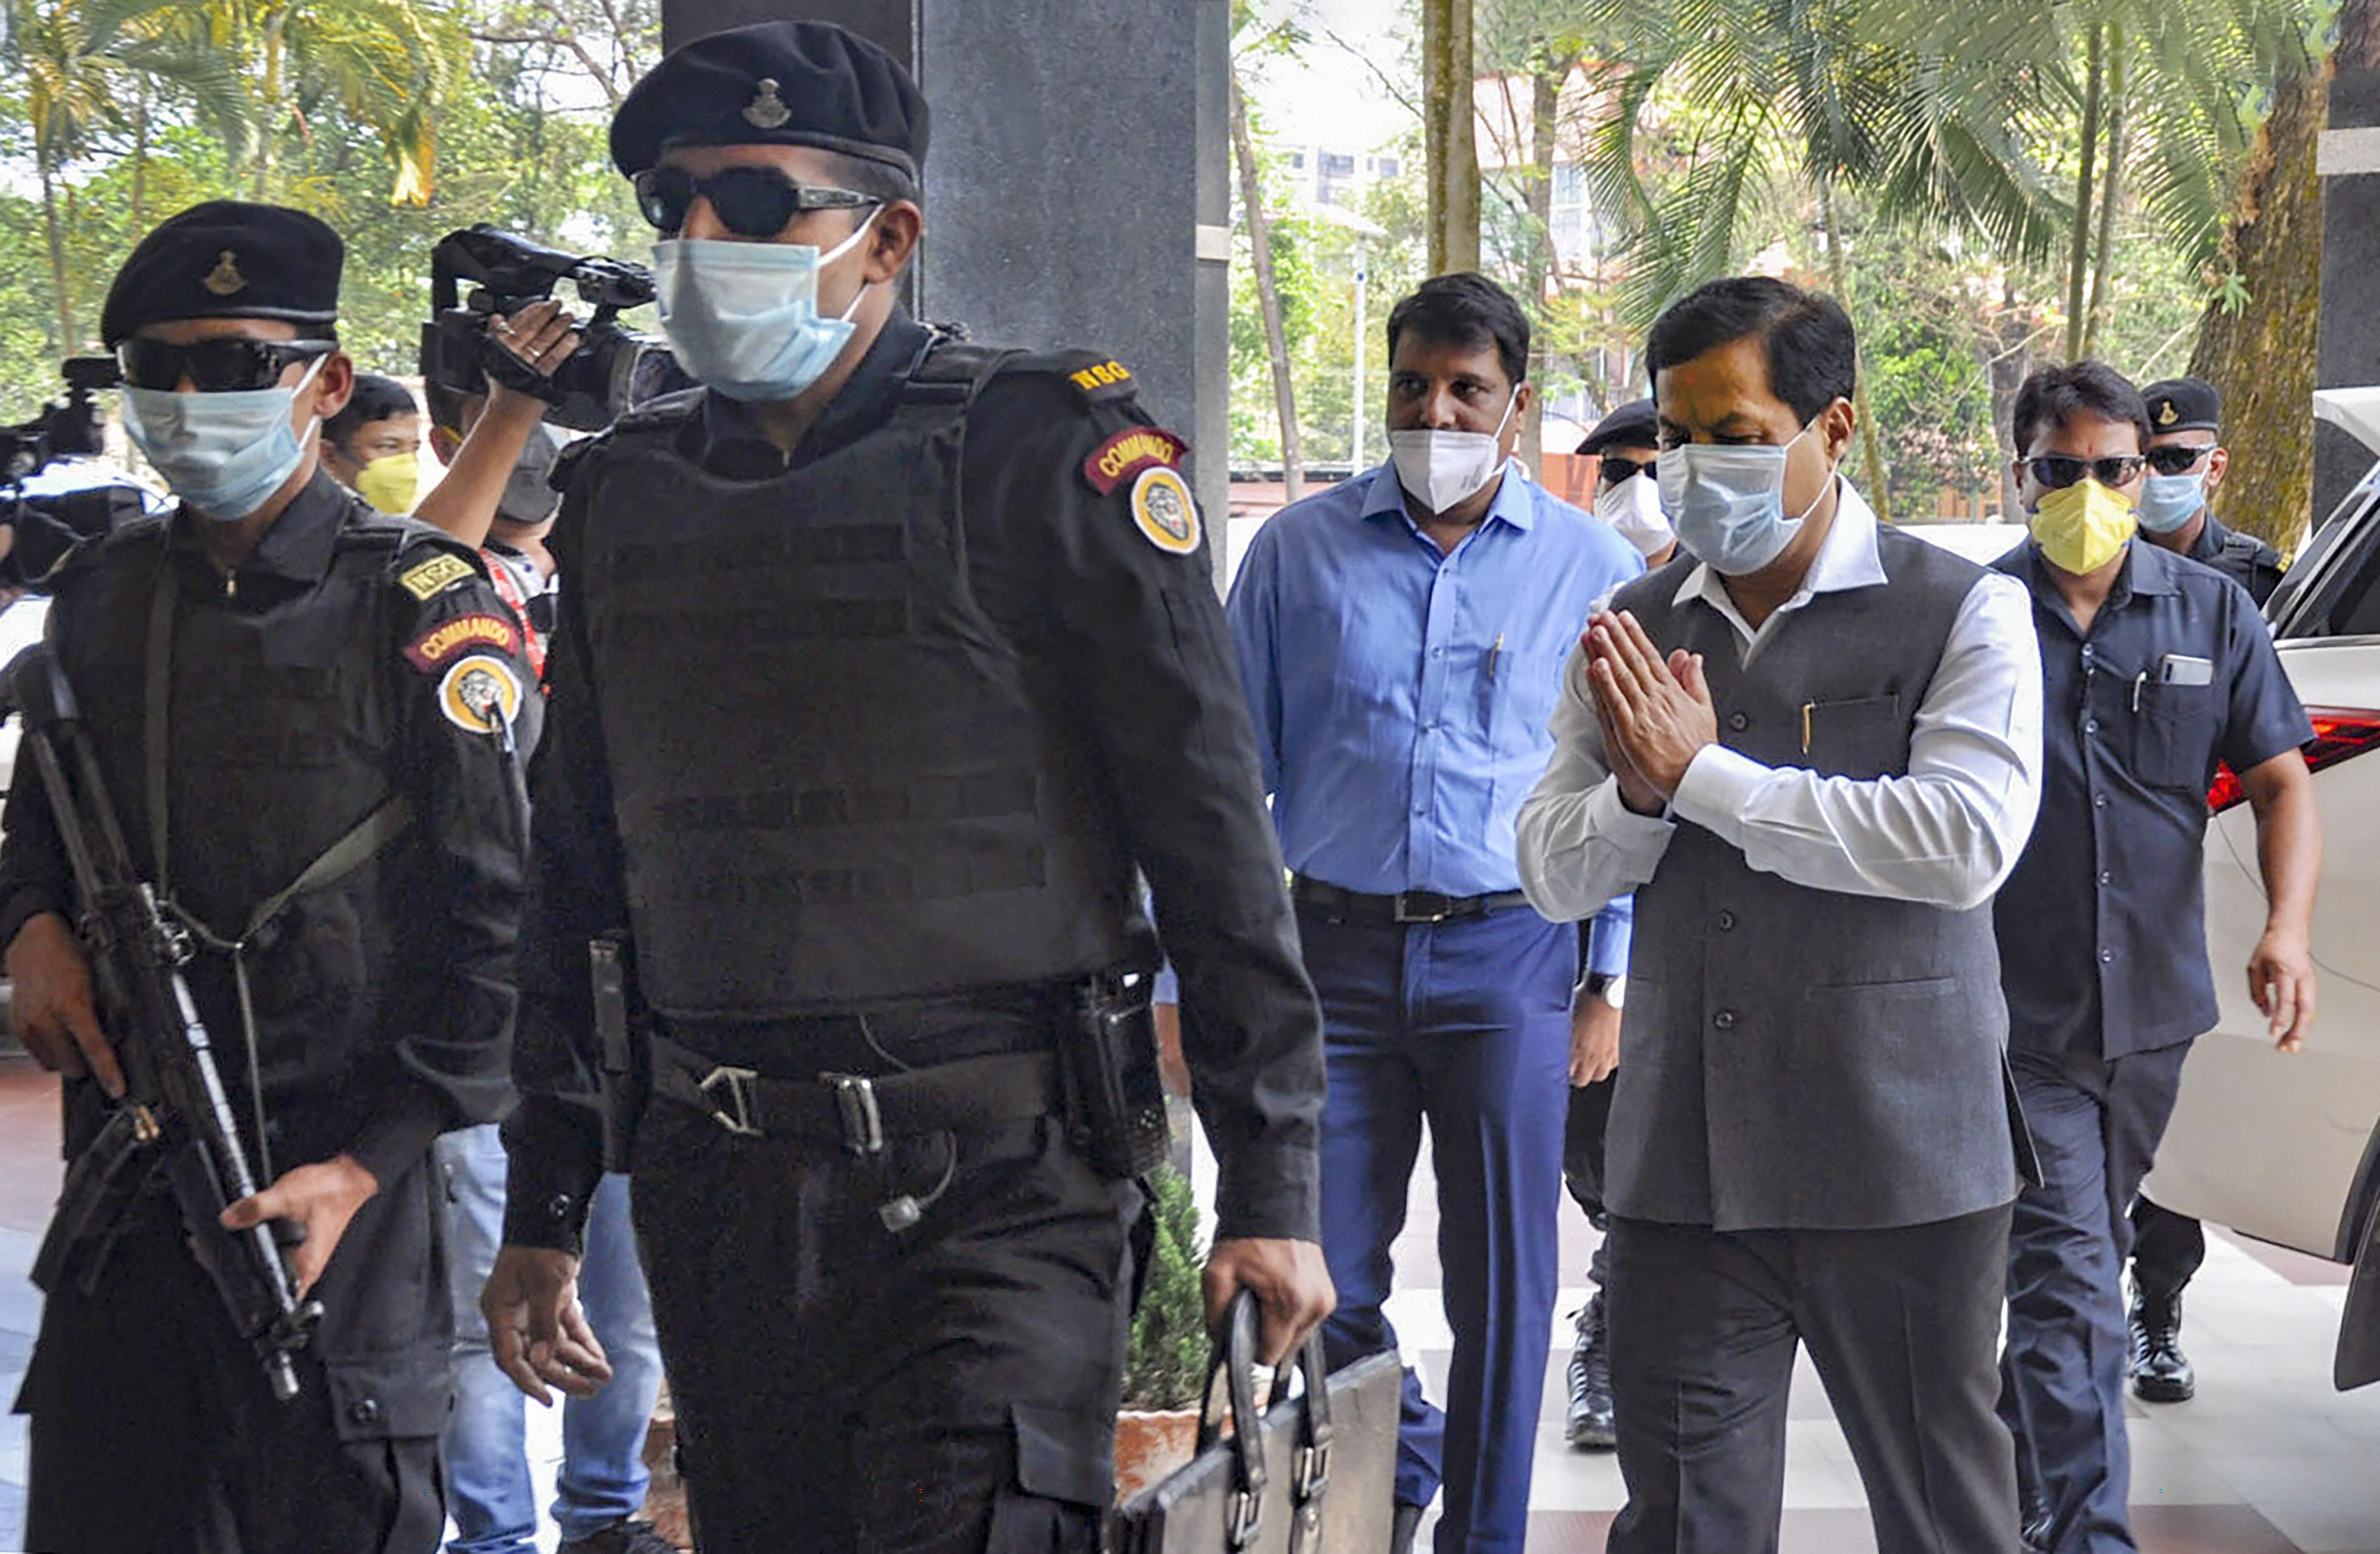  Assam Chief Minister Sarbananda Sonowal wearing a protective mask arrives to attend a special meeting on COVID-19 lockdown in Guwahati on Sunday